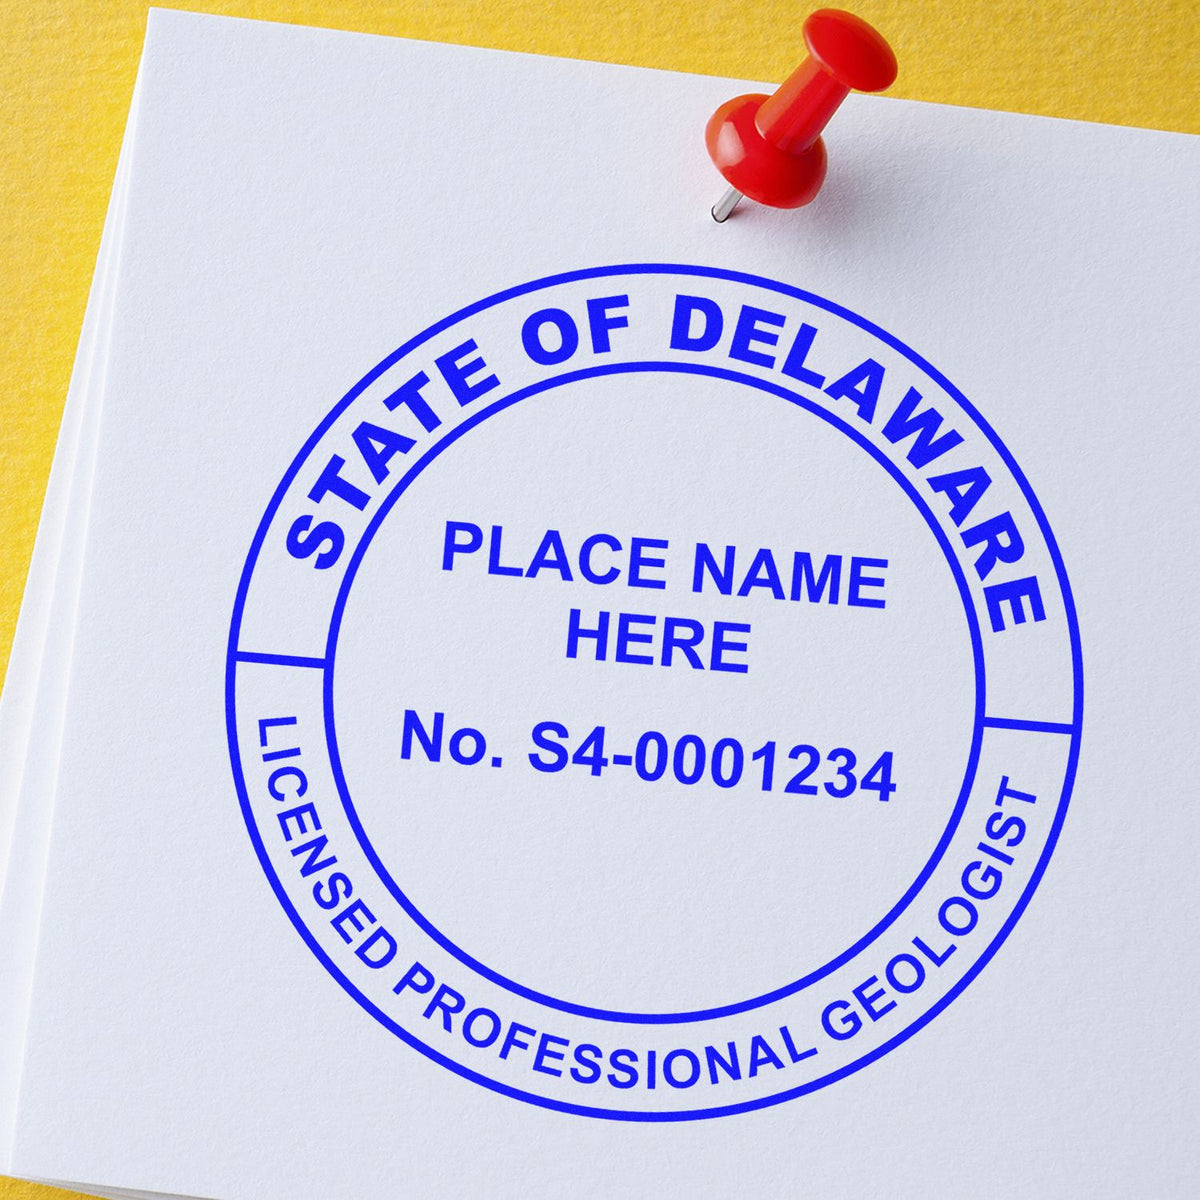 An alternative view of the Self-Inking Delaware Geologist Stamp stamped on a sheet of paper showing the image in use